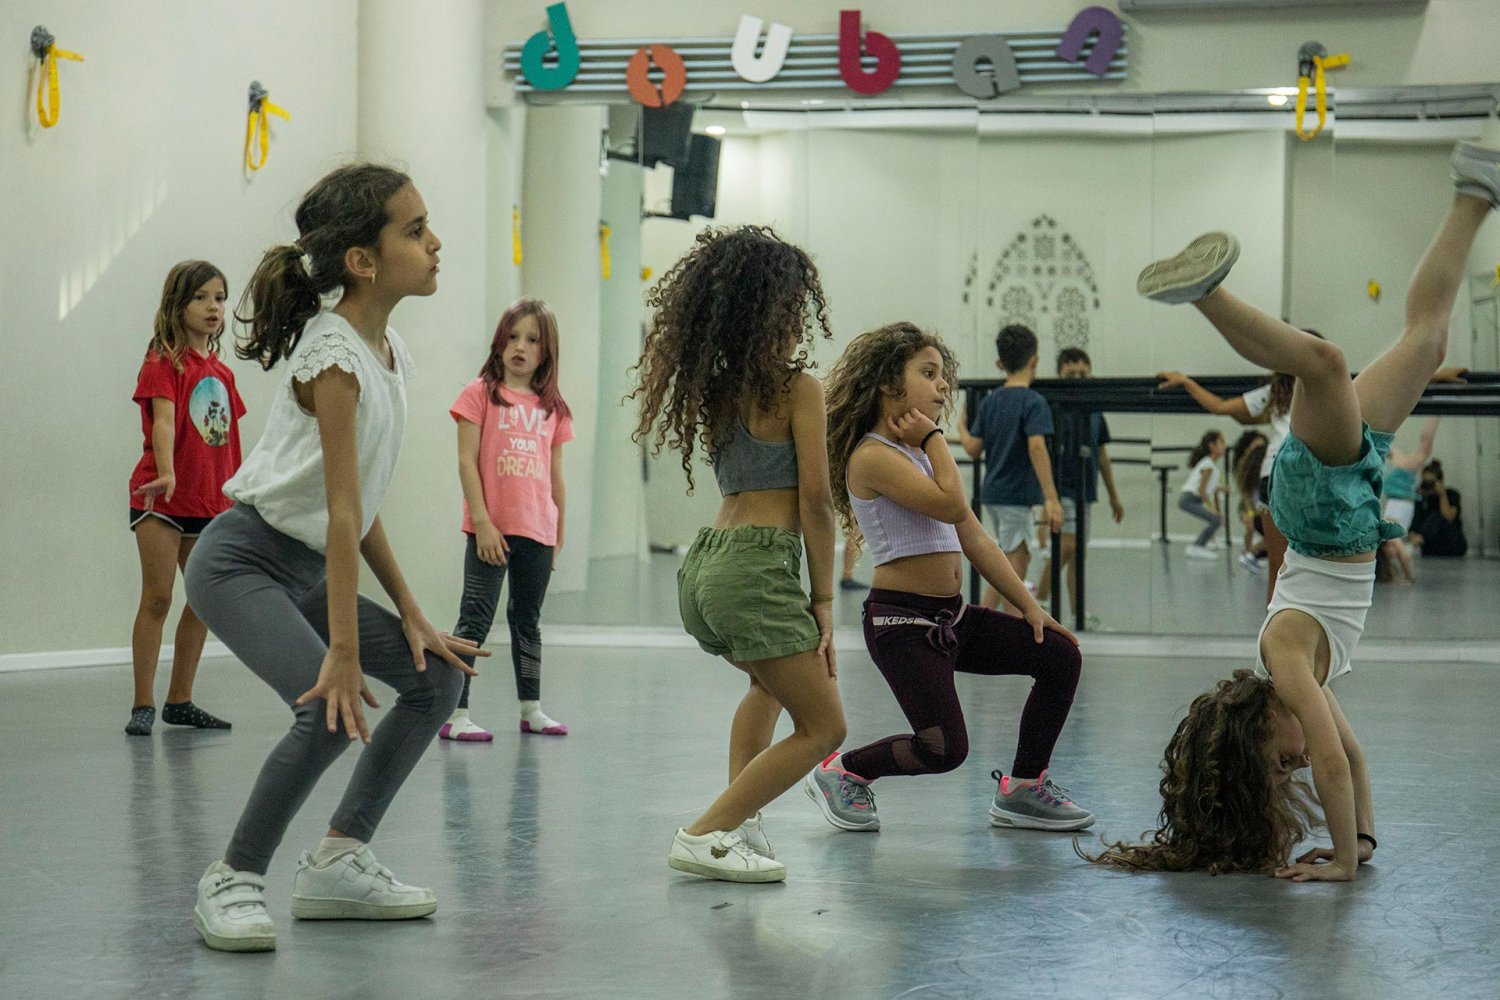 Young students in dance class at the Douban studio in Beit Hanina, East Jerusalem on May 1, 2022.